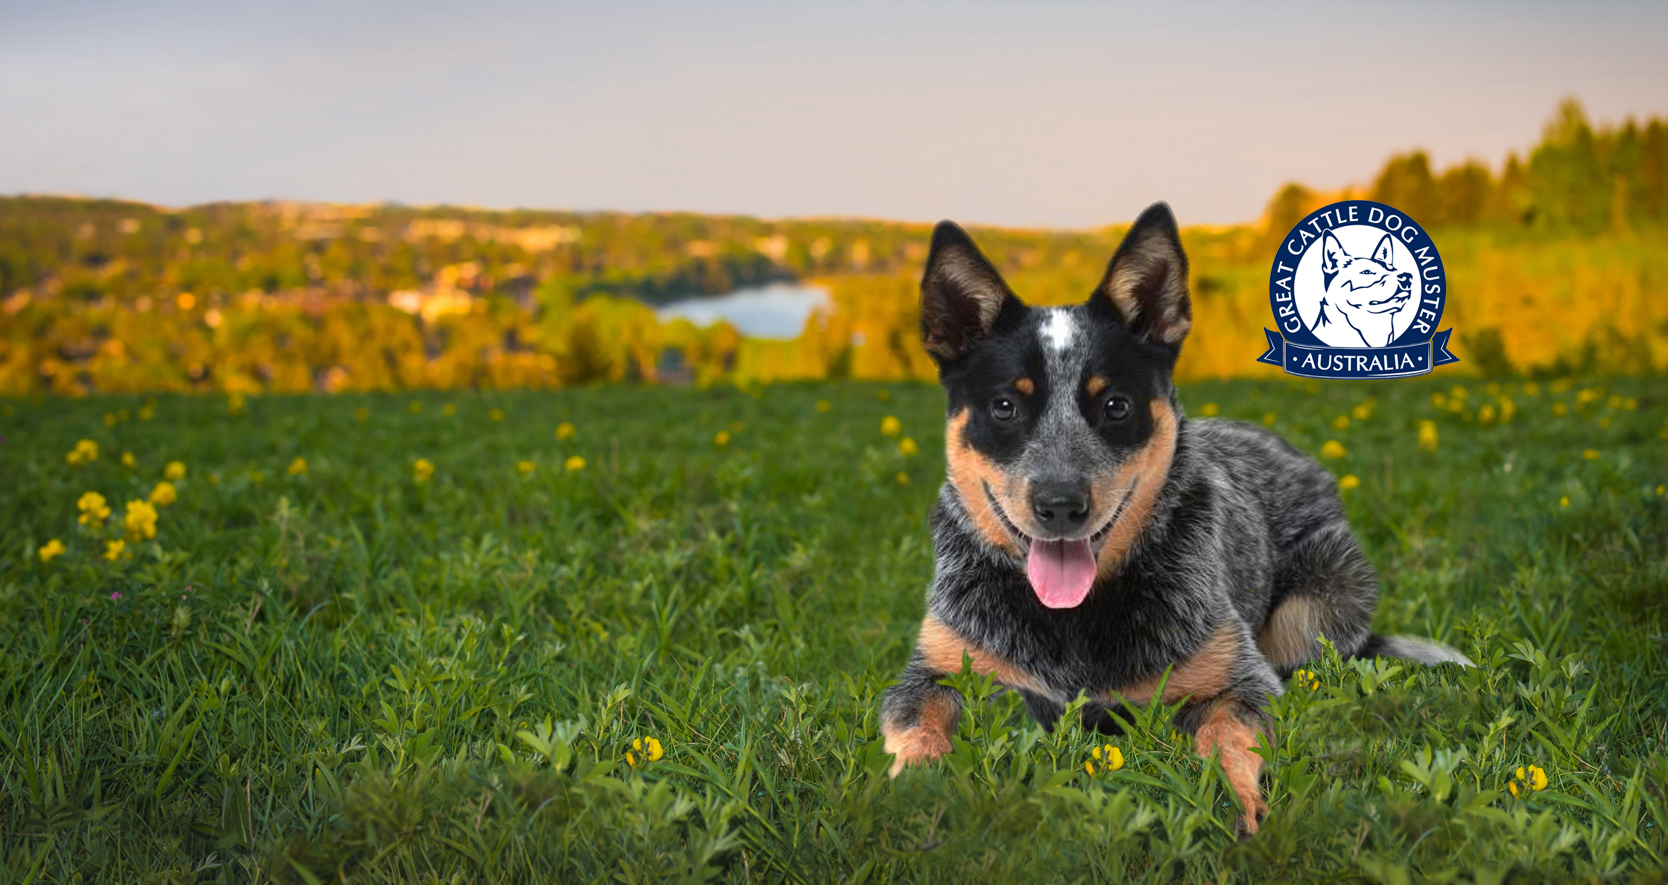 The Great Cattle Dog Muster • Muswellbrook, Upper Hunter Valley